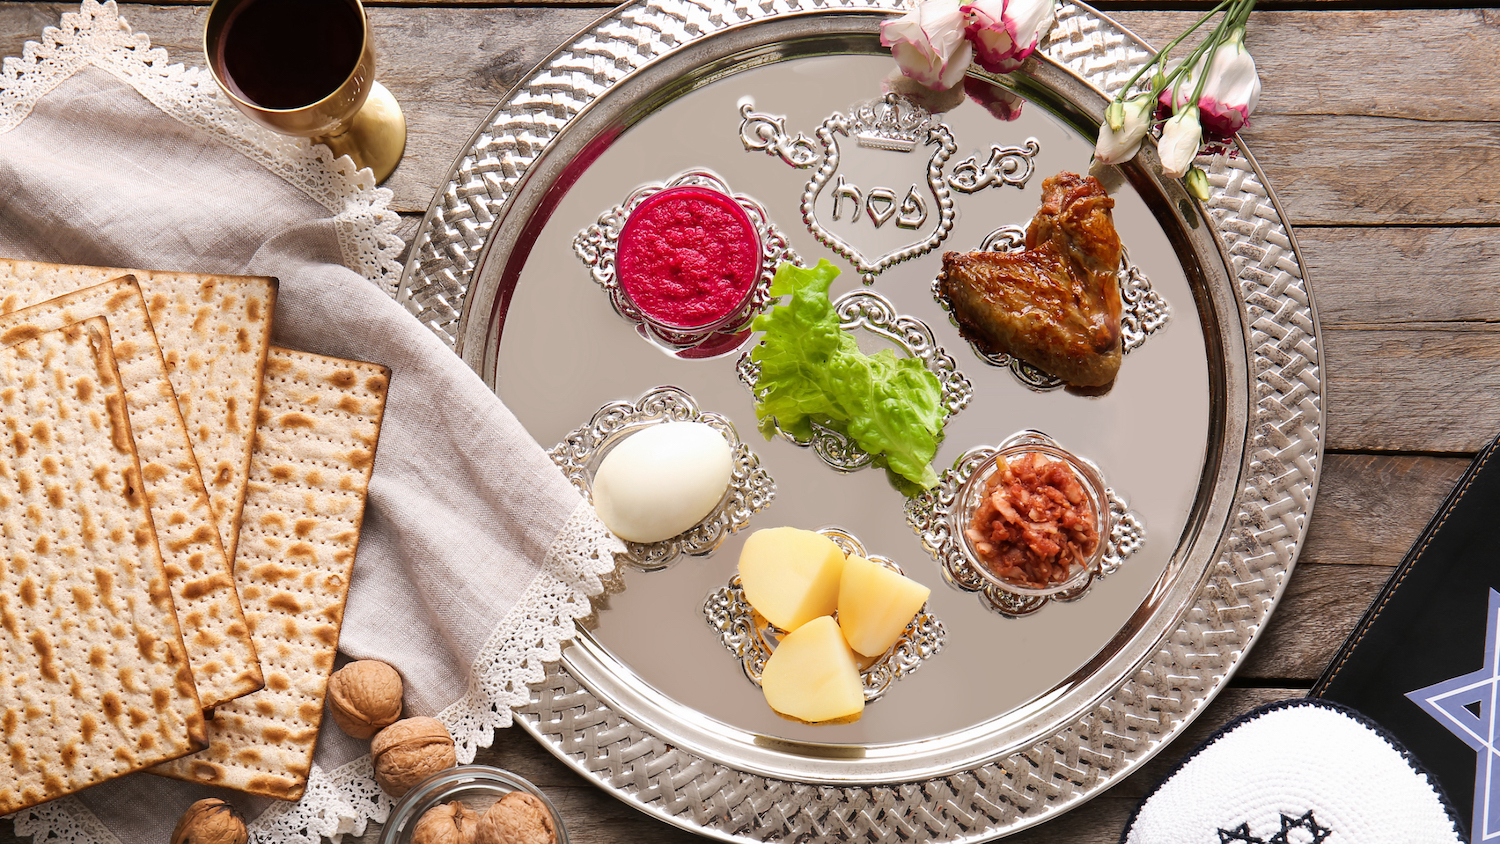 Passover memories include this centerpiece of a Seder plate